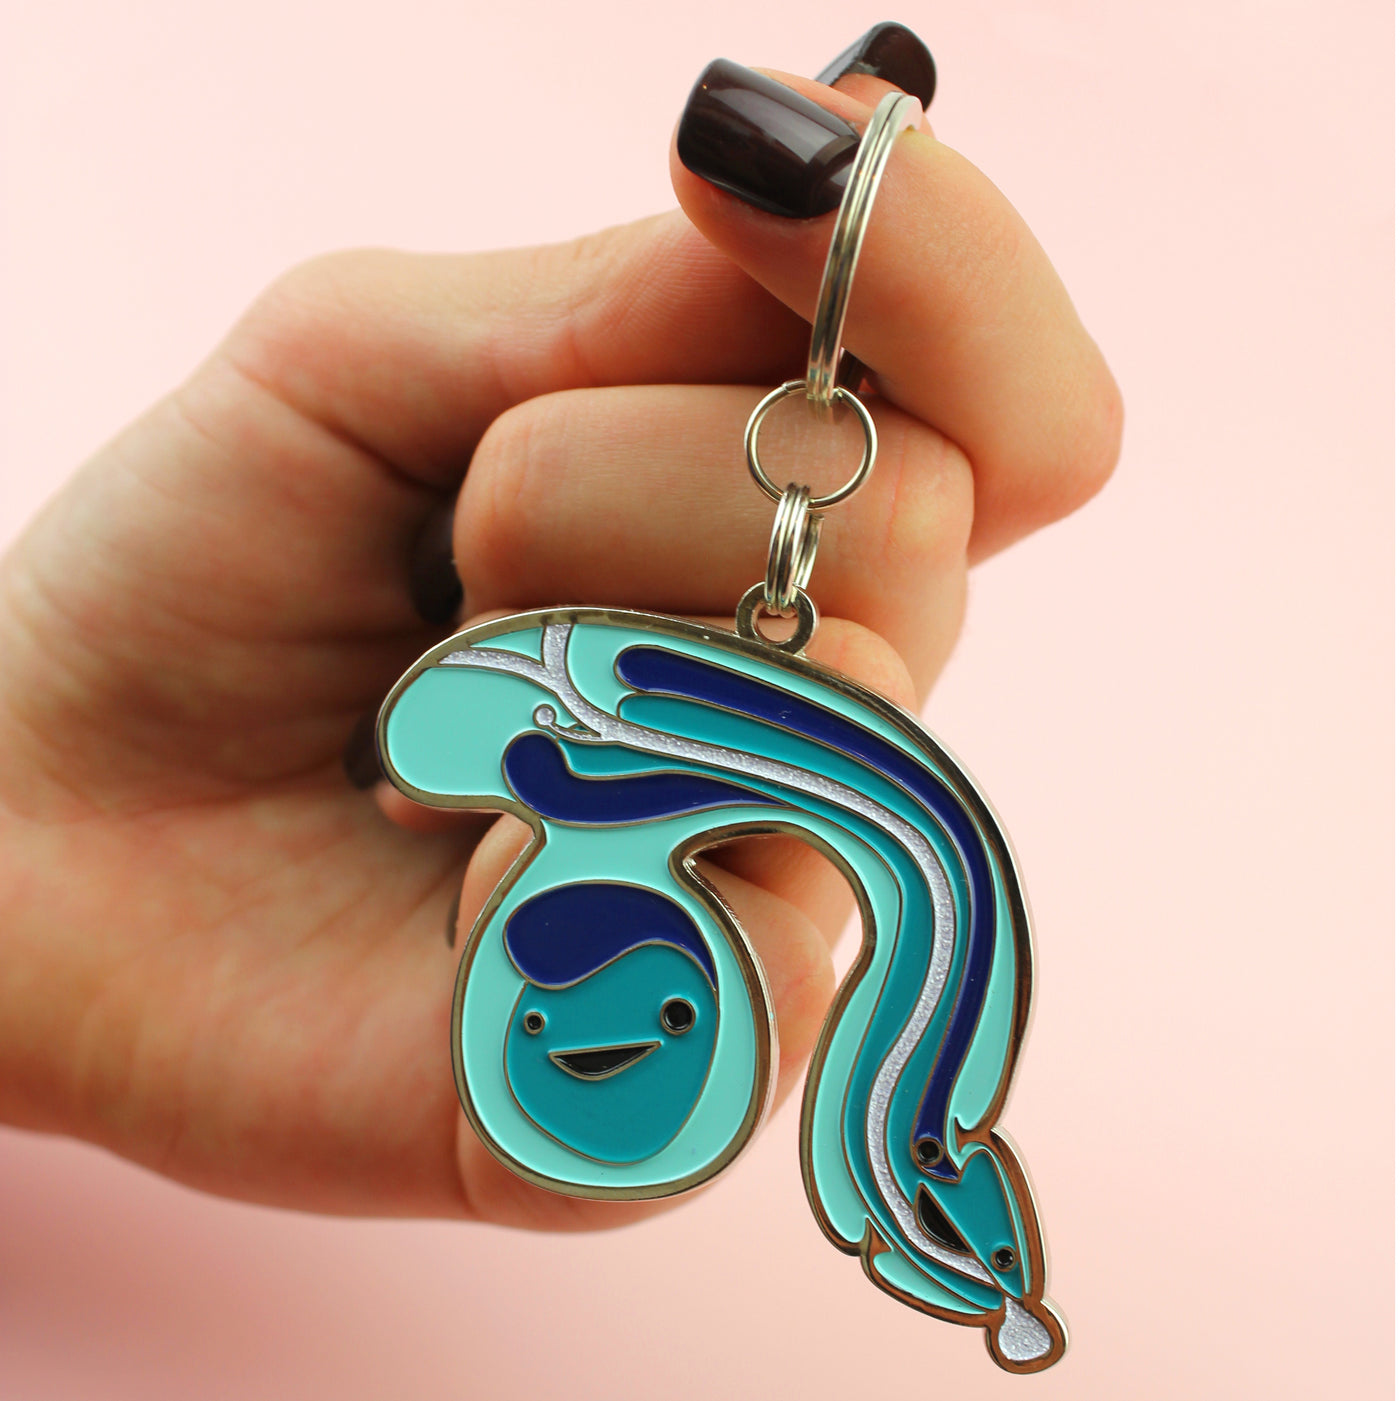 Blue Peen Keychain with Sparkly Anatomical Plumbing | I Heart Guts